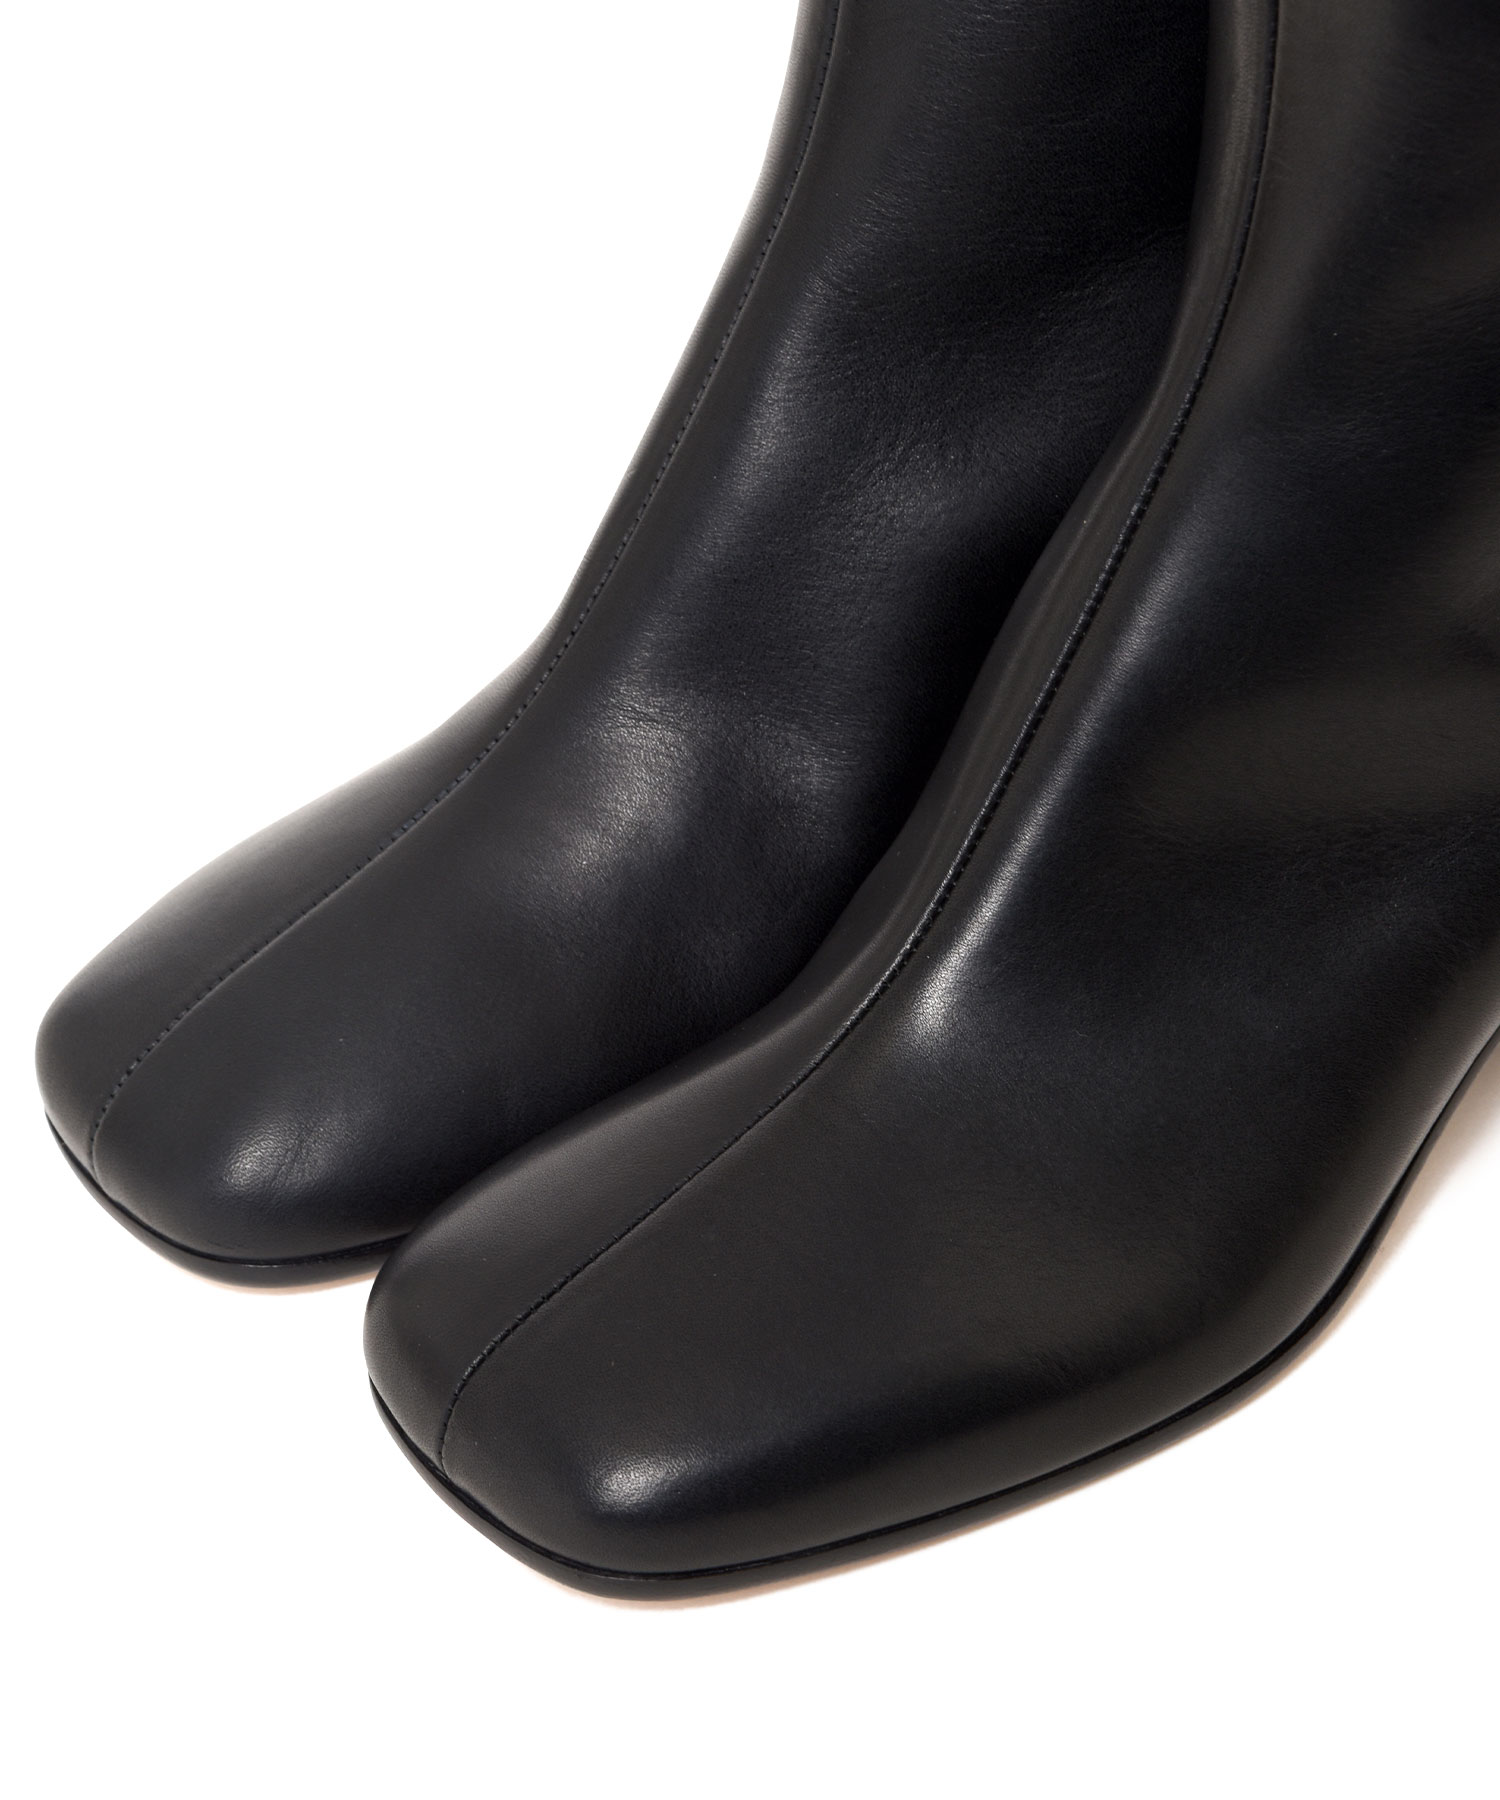 Ankle BOOTS（MM6 Maison Margiela）｜TATRAS CONCEPT STORE タトラス公式通販サイト